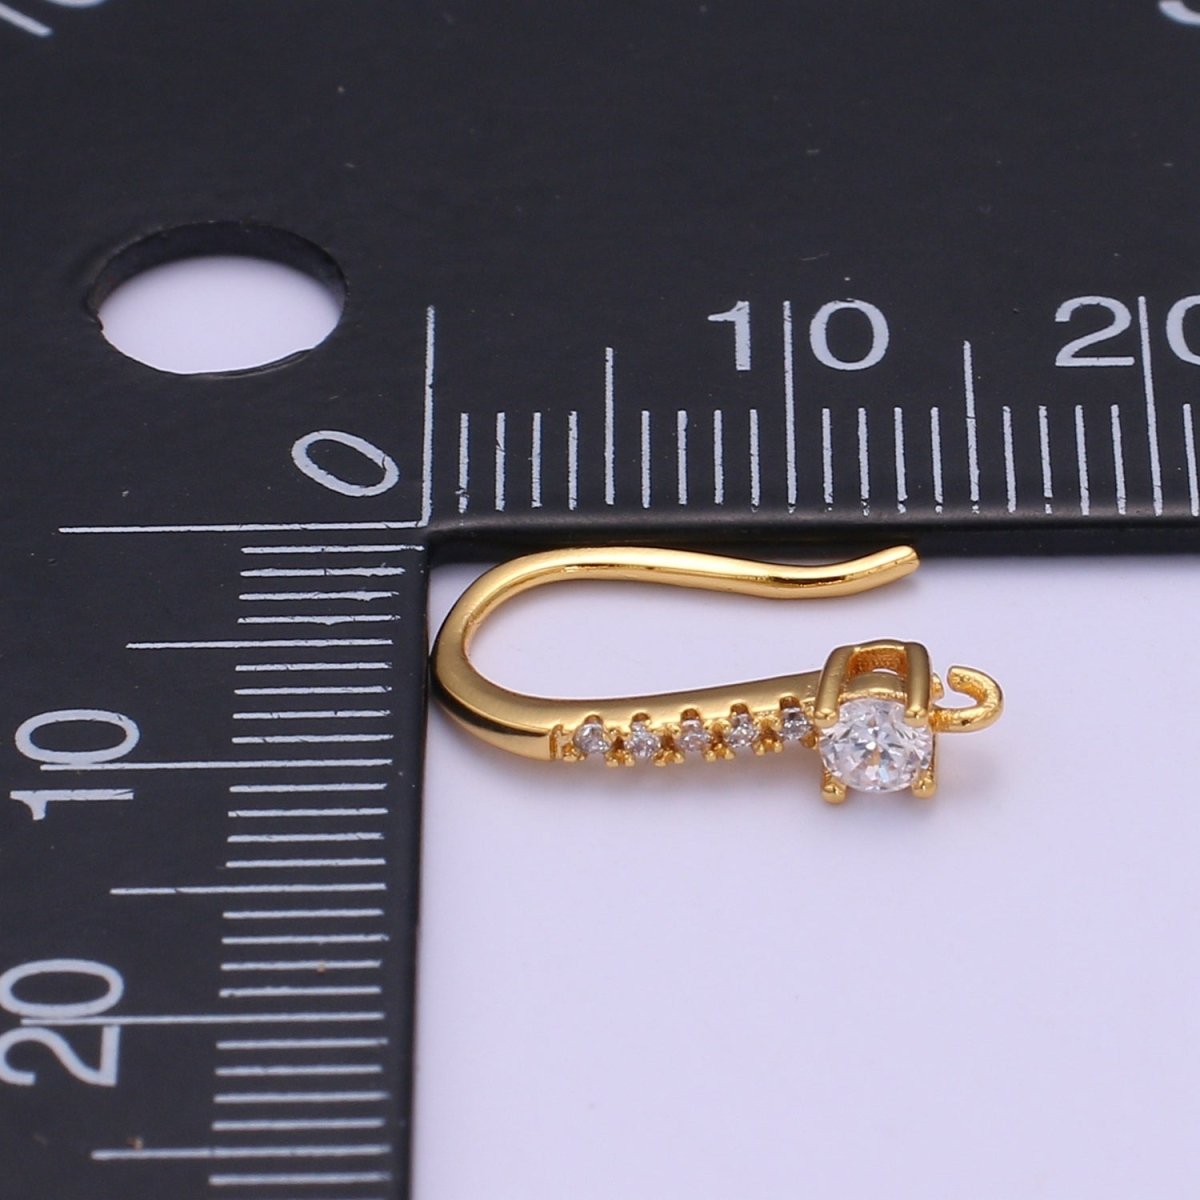 Gold Fish Hook Earrings Ear Wires French Hooks 15.5x9.5mm size 1 pair Open loop Micro Pave Cz Hook Earring Supply L-235~L-237 - DLUXCA